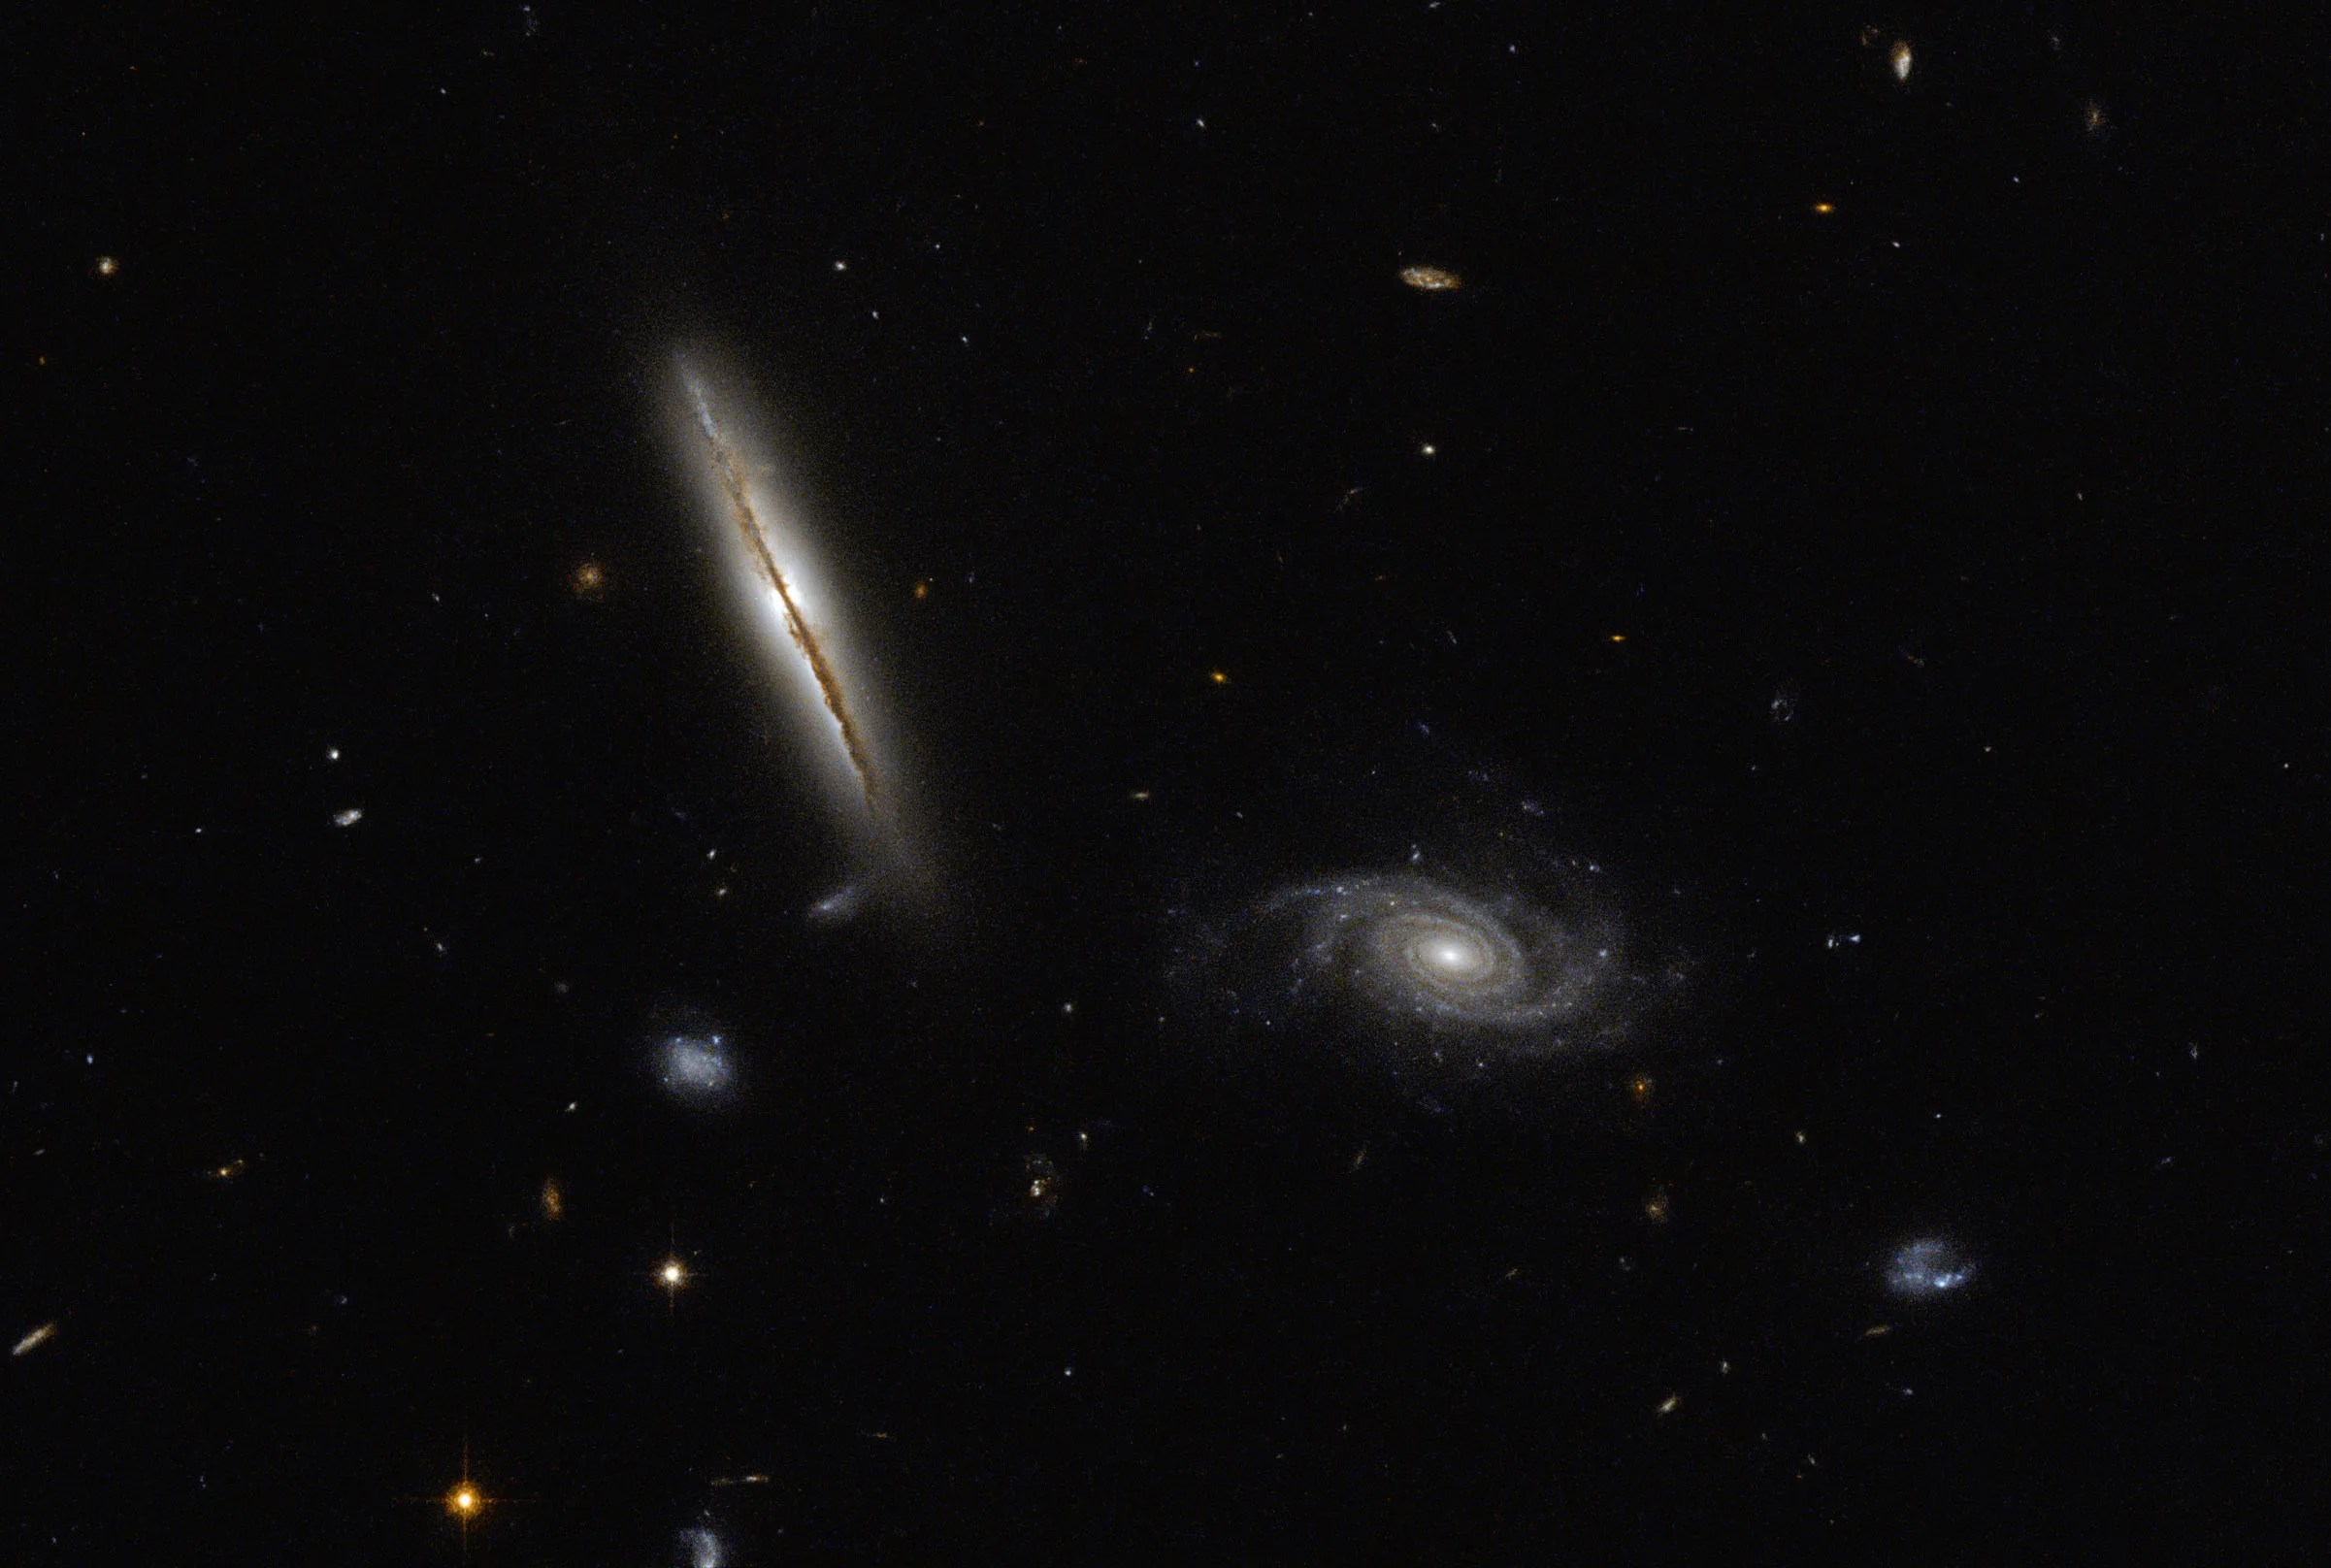 Two spiral galaxies: the main one on the left is seen nearly head-on, just able to see the brownish dust of the disk with a yellowish glow. Its companion spiral is seen more face-on, with grayish-yellow spiral arms.